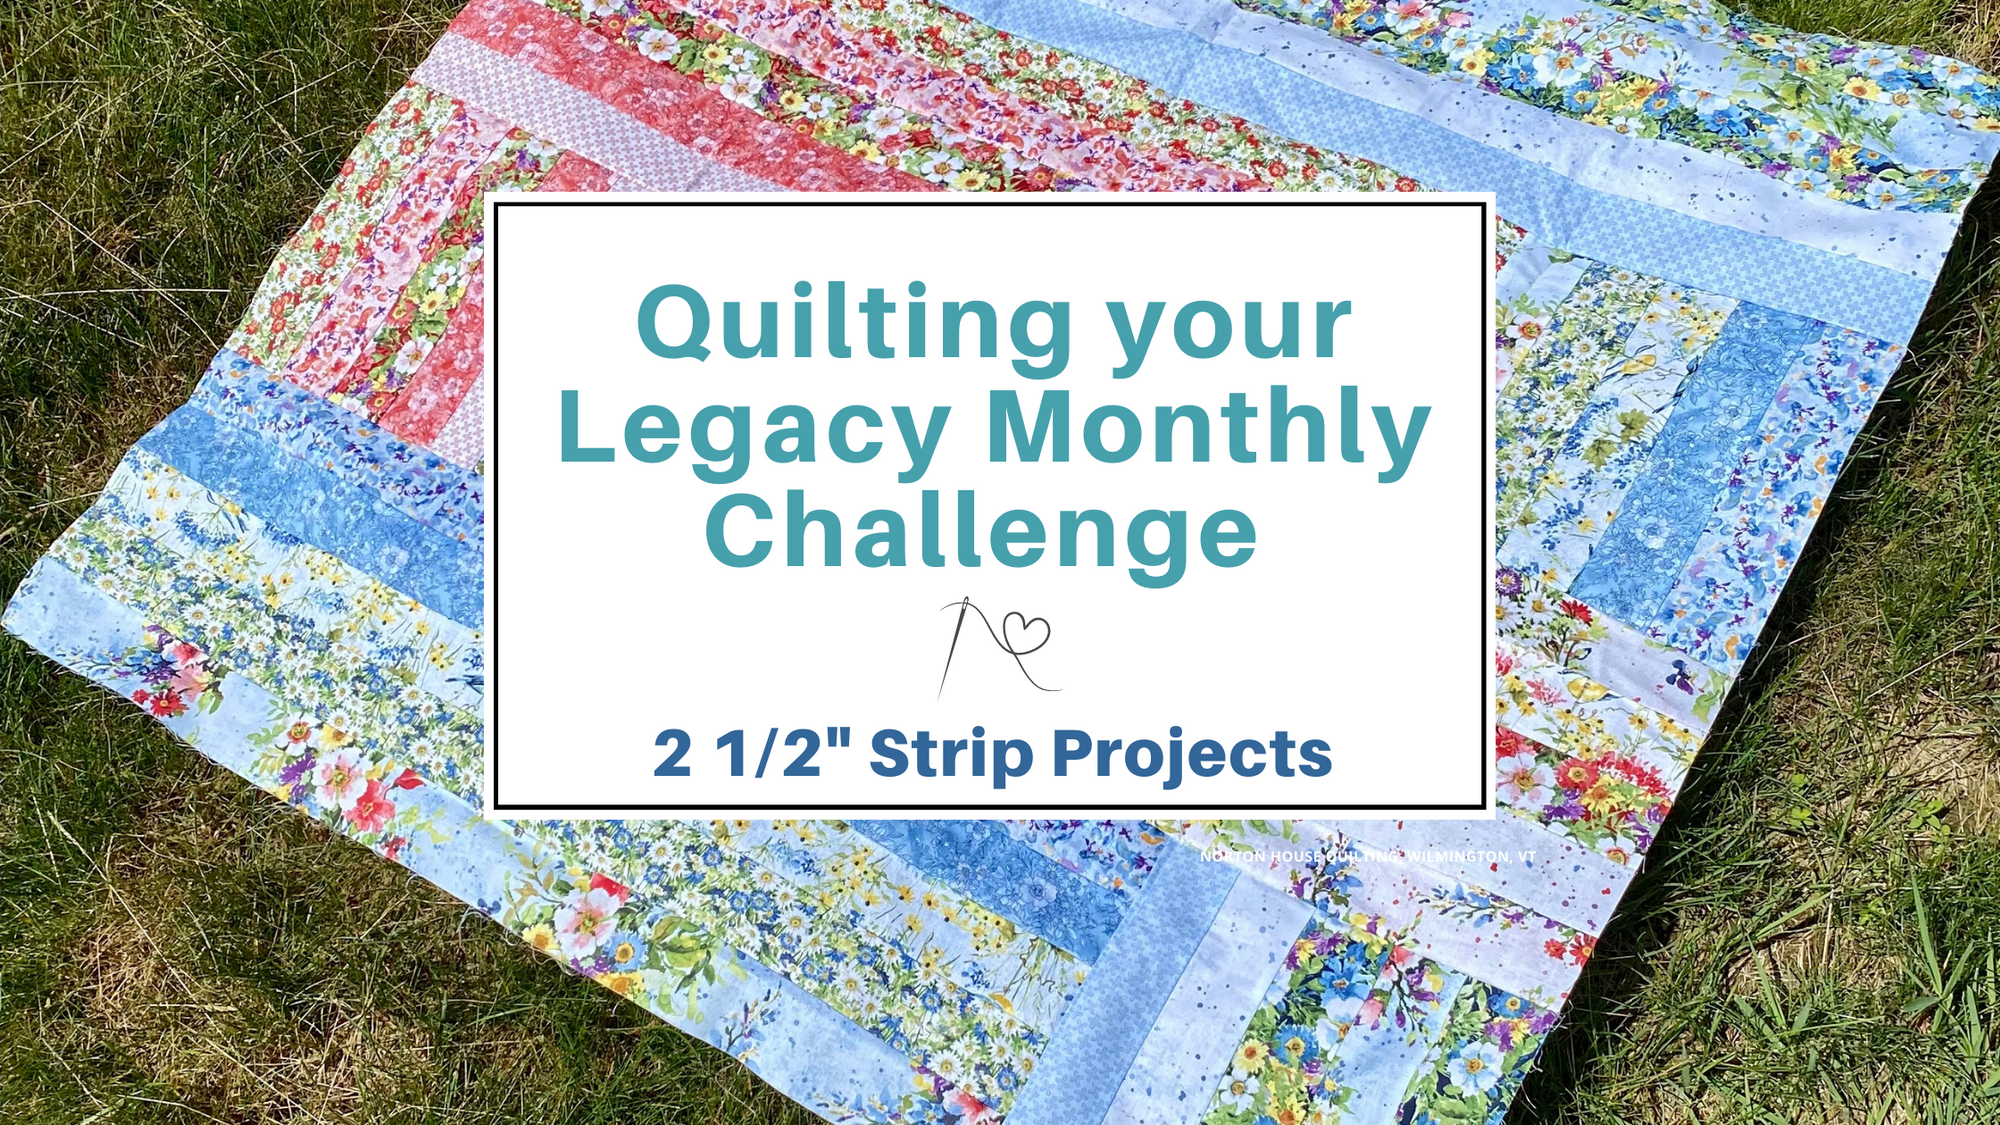 Quilting your Legacy Monthly Challenge is Projects only made with 2 1/2" strips